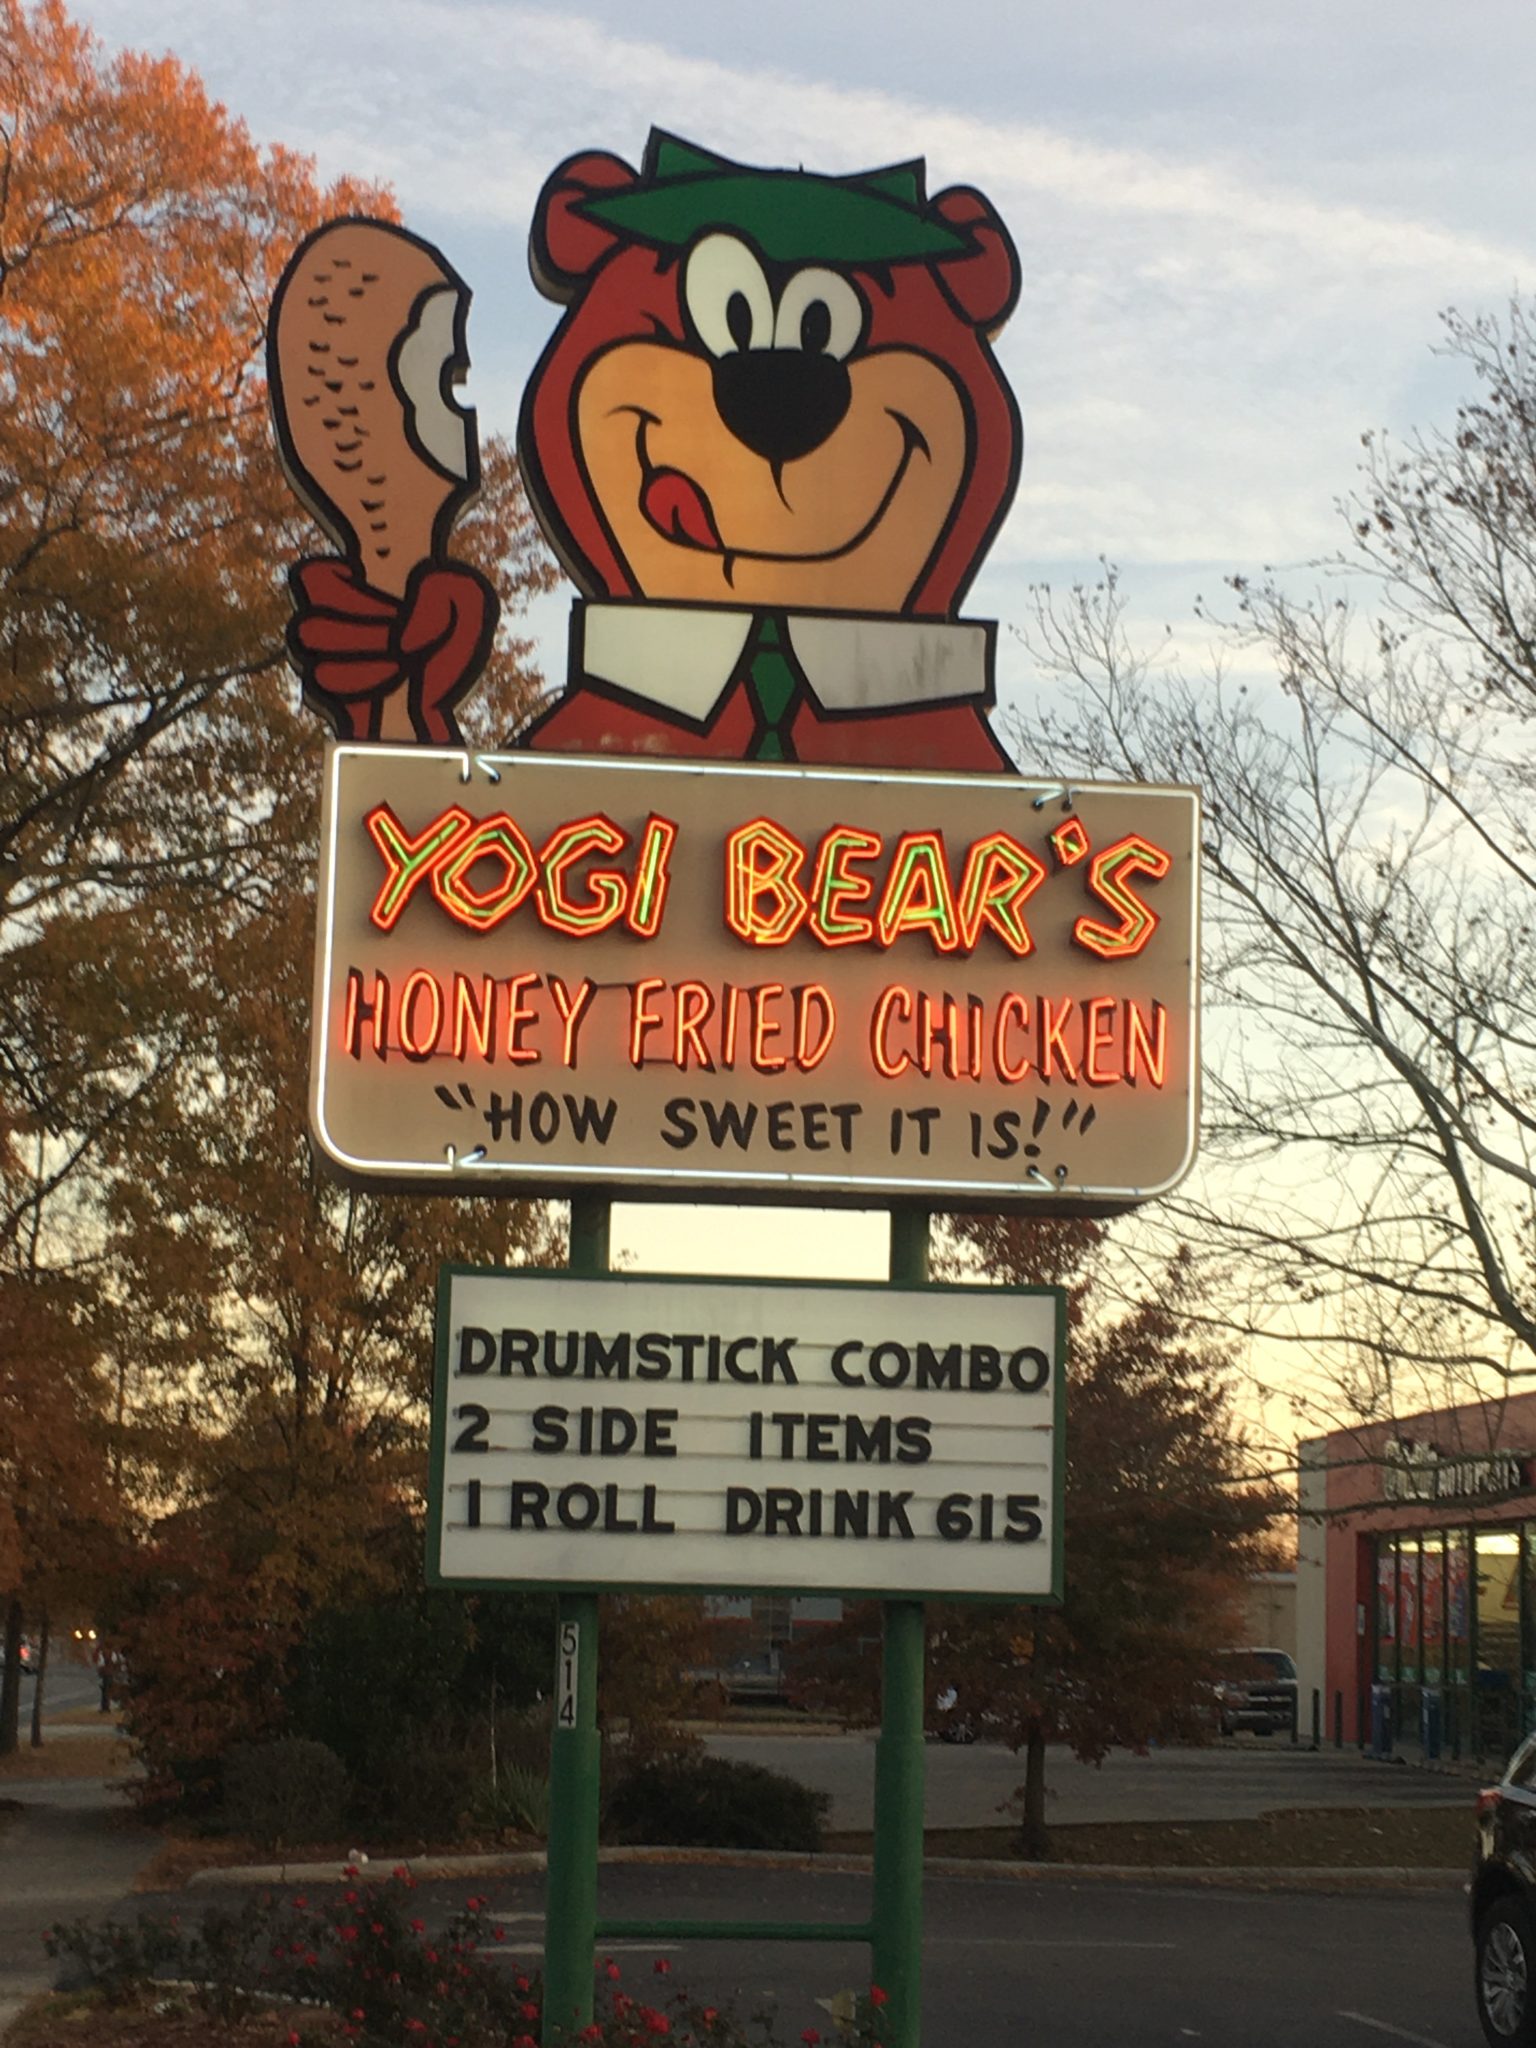 Yogi Bear Honey Fried Chicken - This weeks Travel Thursday feature. My wife has always talked about how great their fried chicken is and wanted me to try it too. #YogiBearHoneyFriedChicken